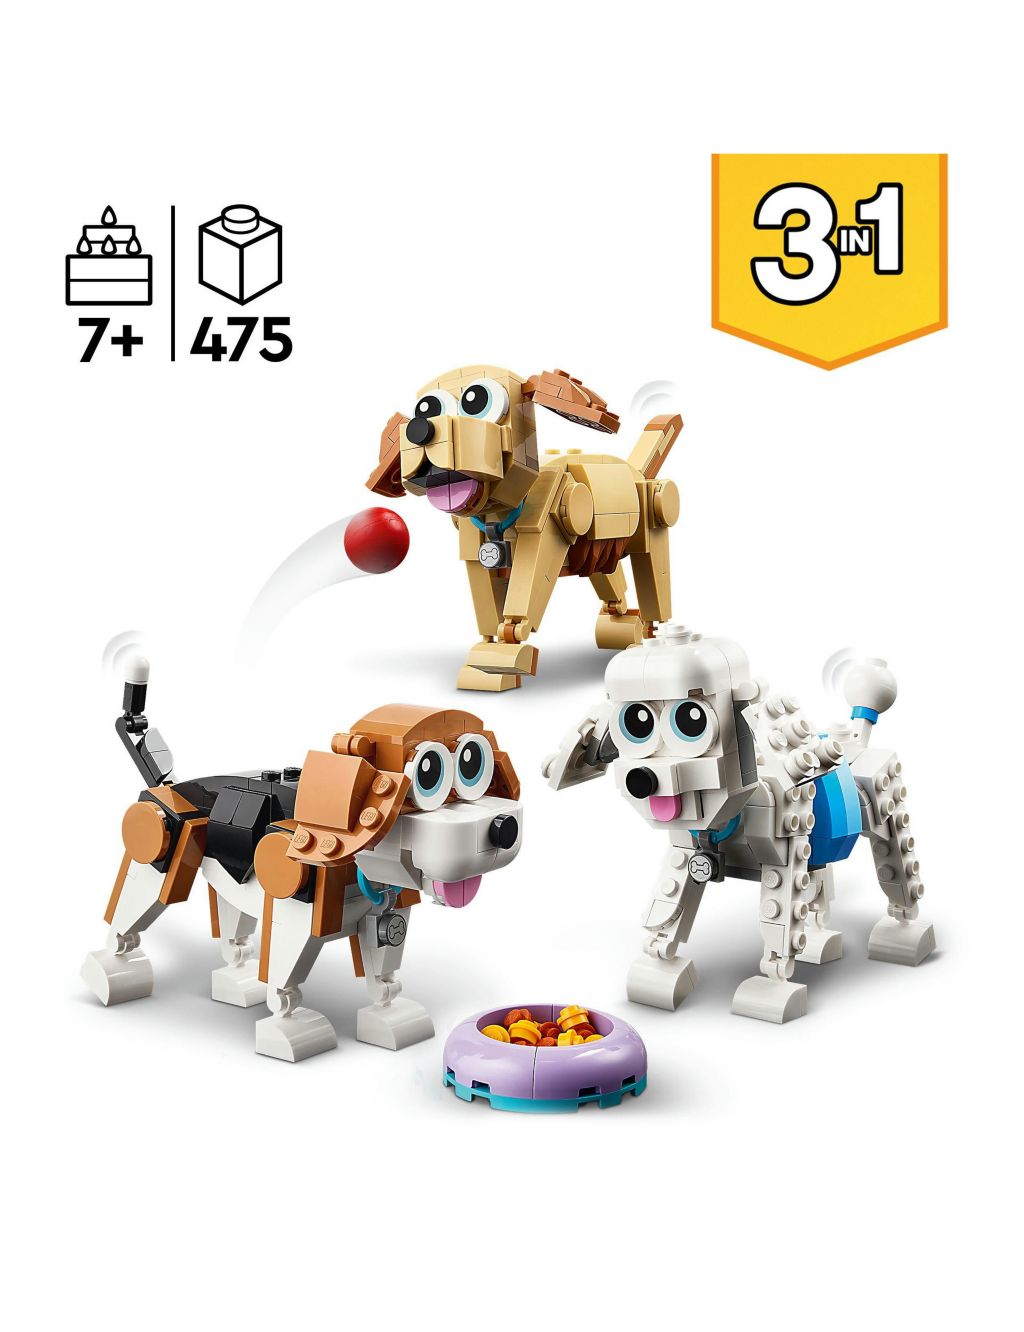 LEGO Creator 3 in 1 Adorable Dogs Animal Toys (7+ Yrs) image 2